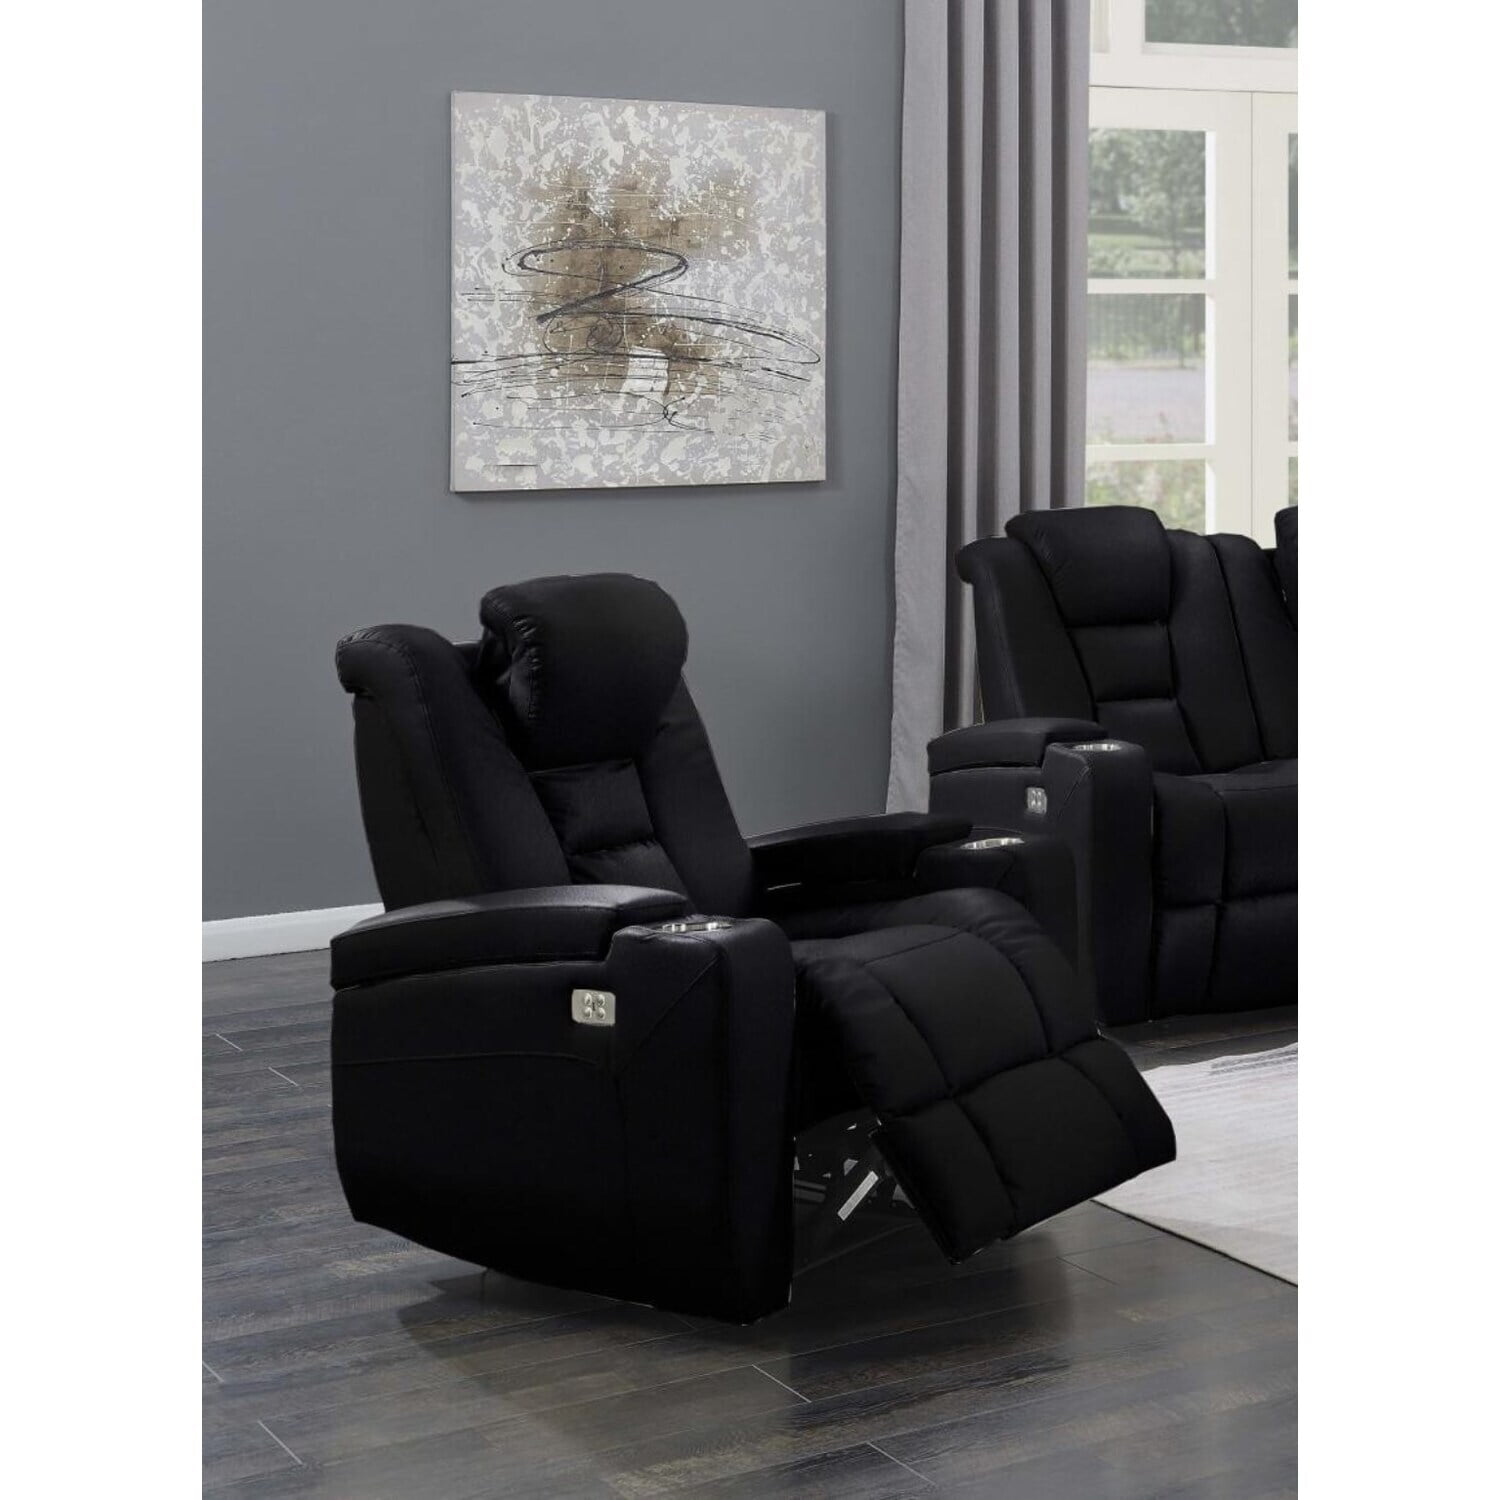 Transformers Leather Recliner Chair in Black